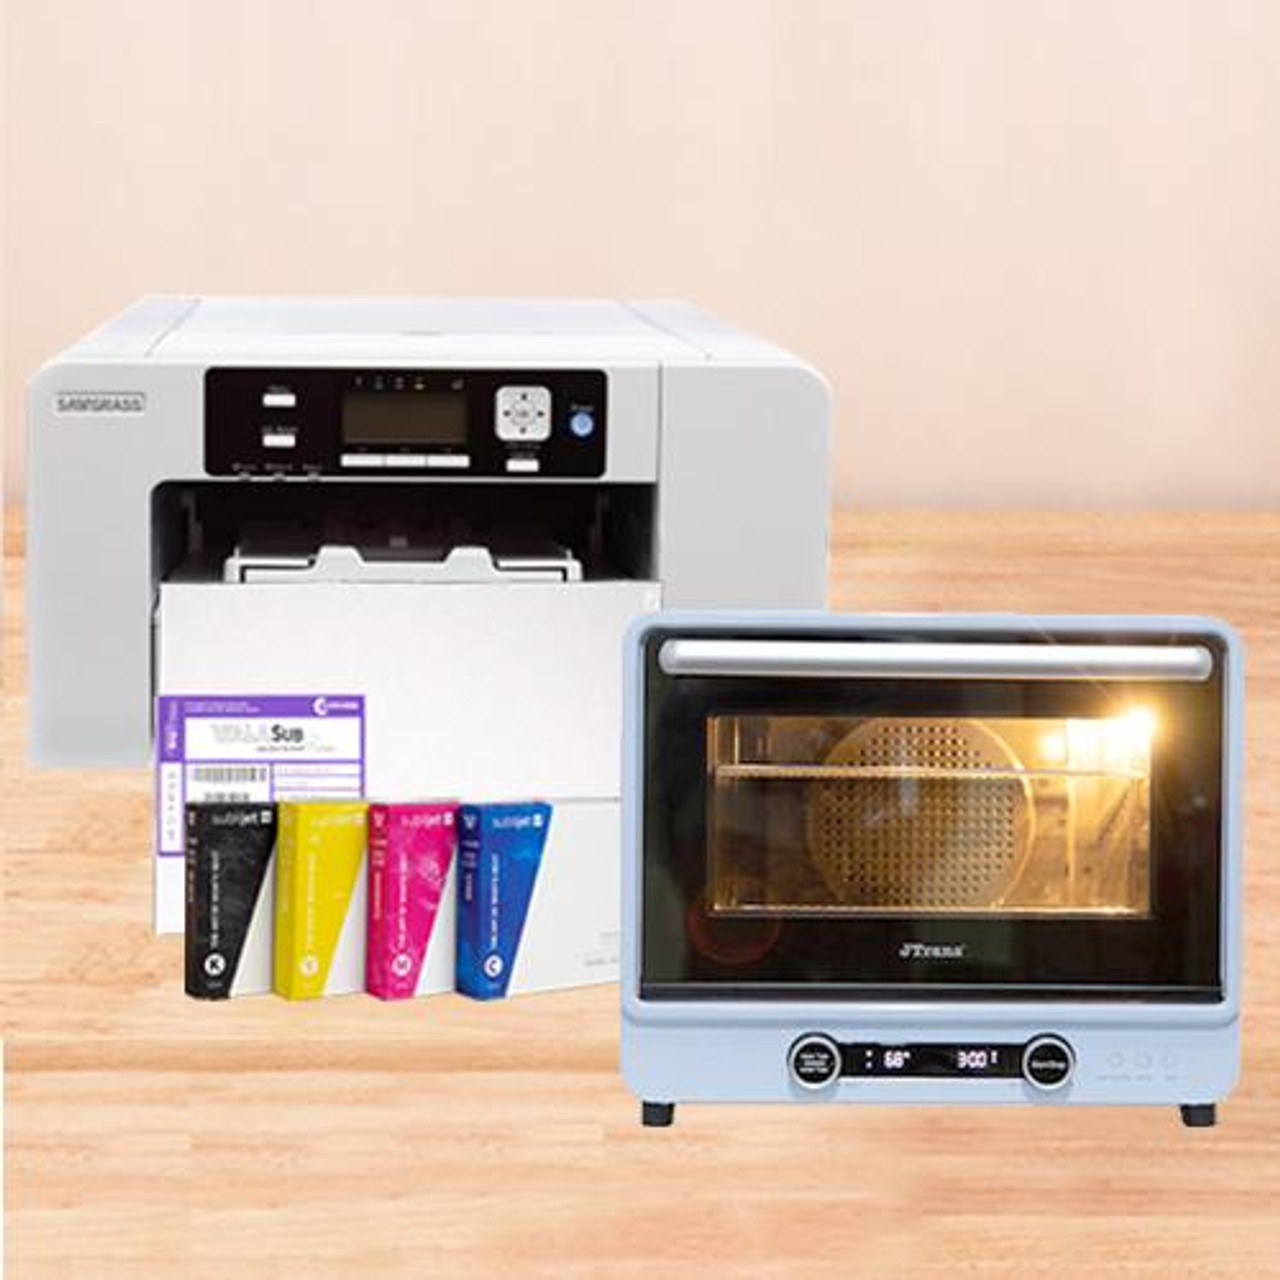 Do Countertop Ovens Use A Lot Of Electricity?, by Best Convection Oven For  Sublimation